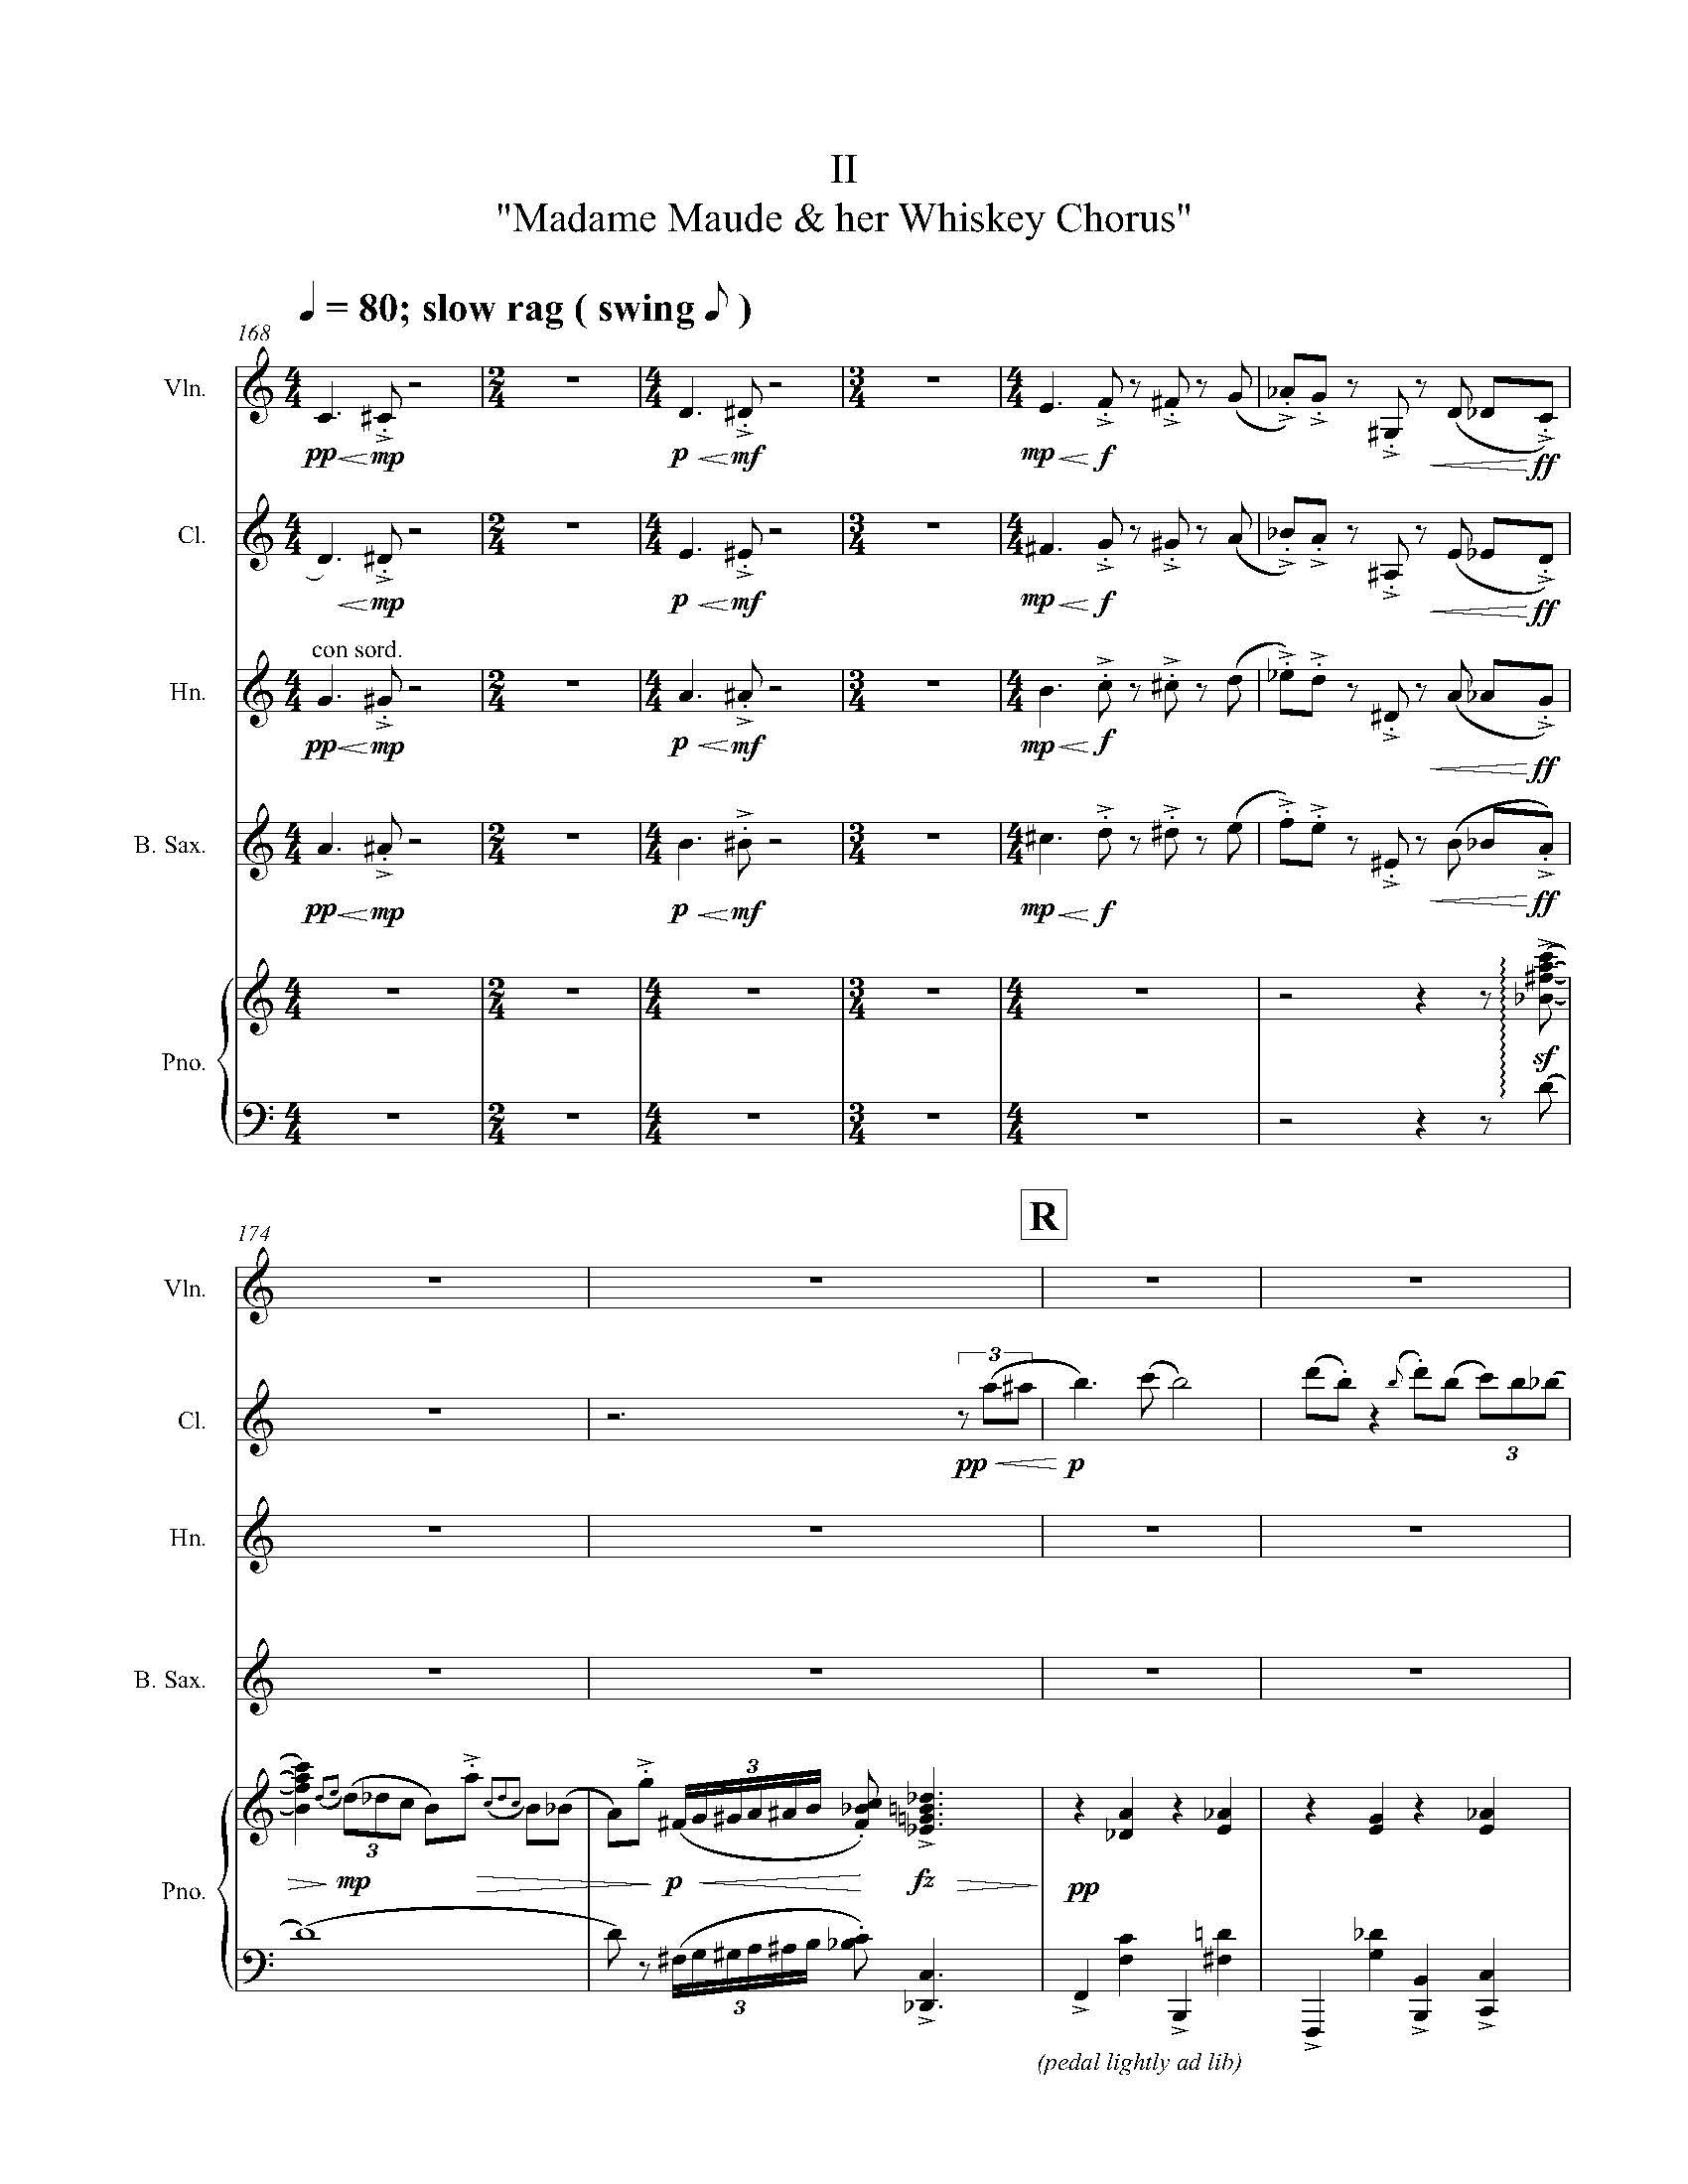 The Outlaw in the Gilded Age - Complete Score_Page_29.jpg